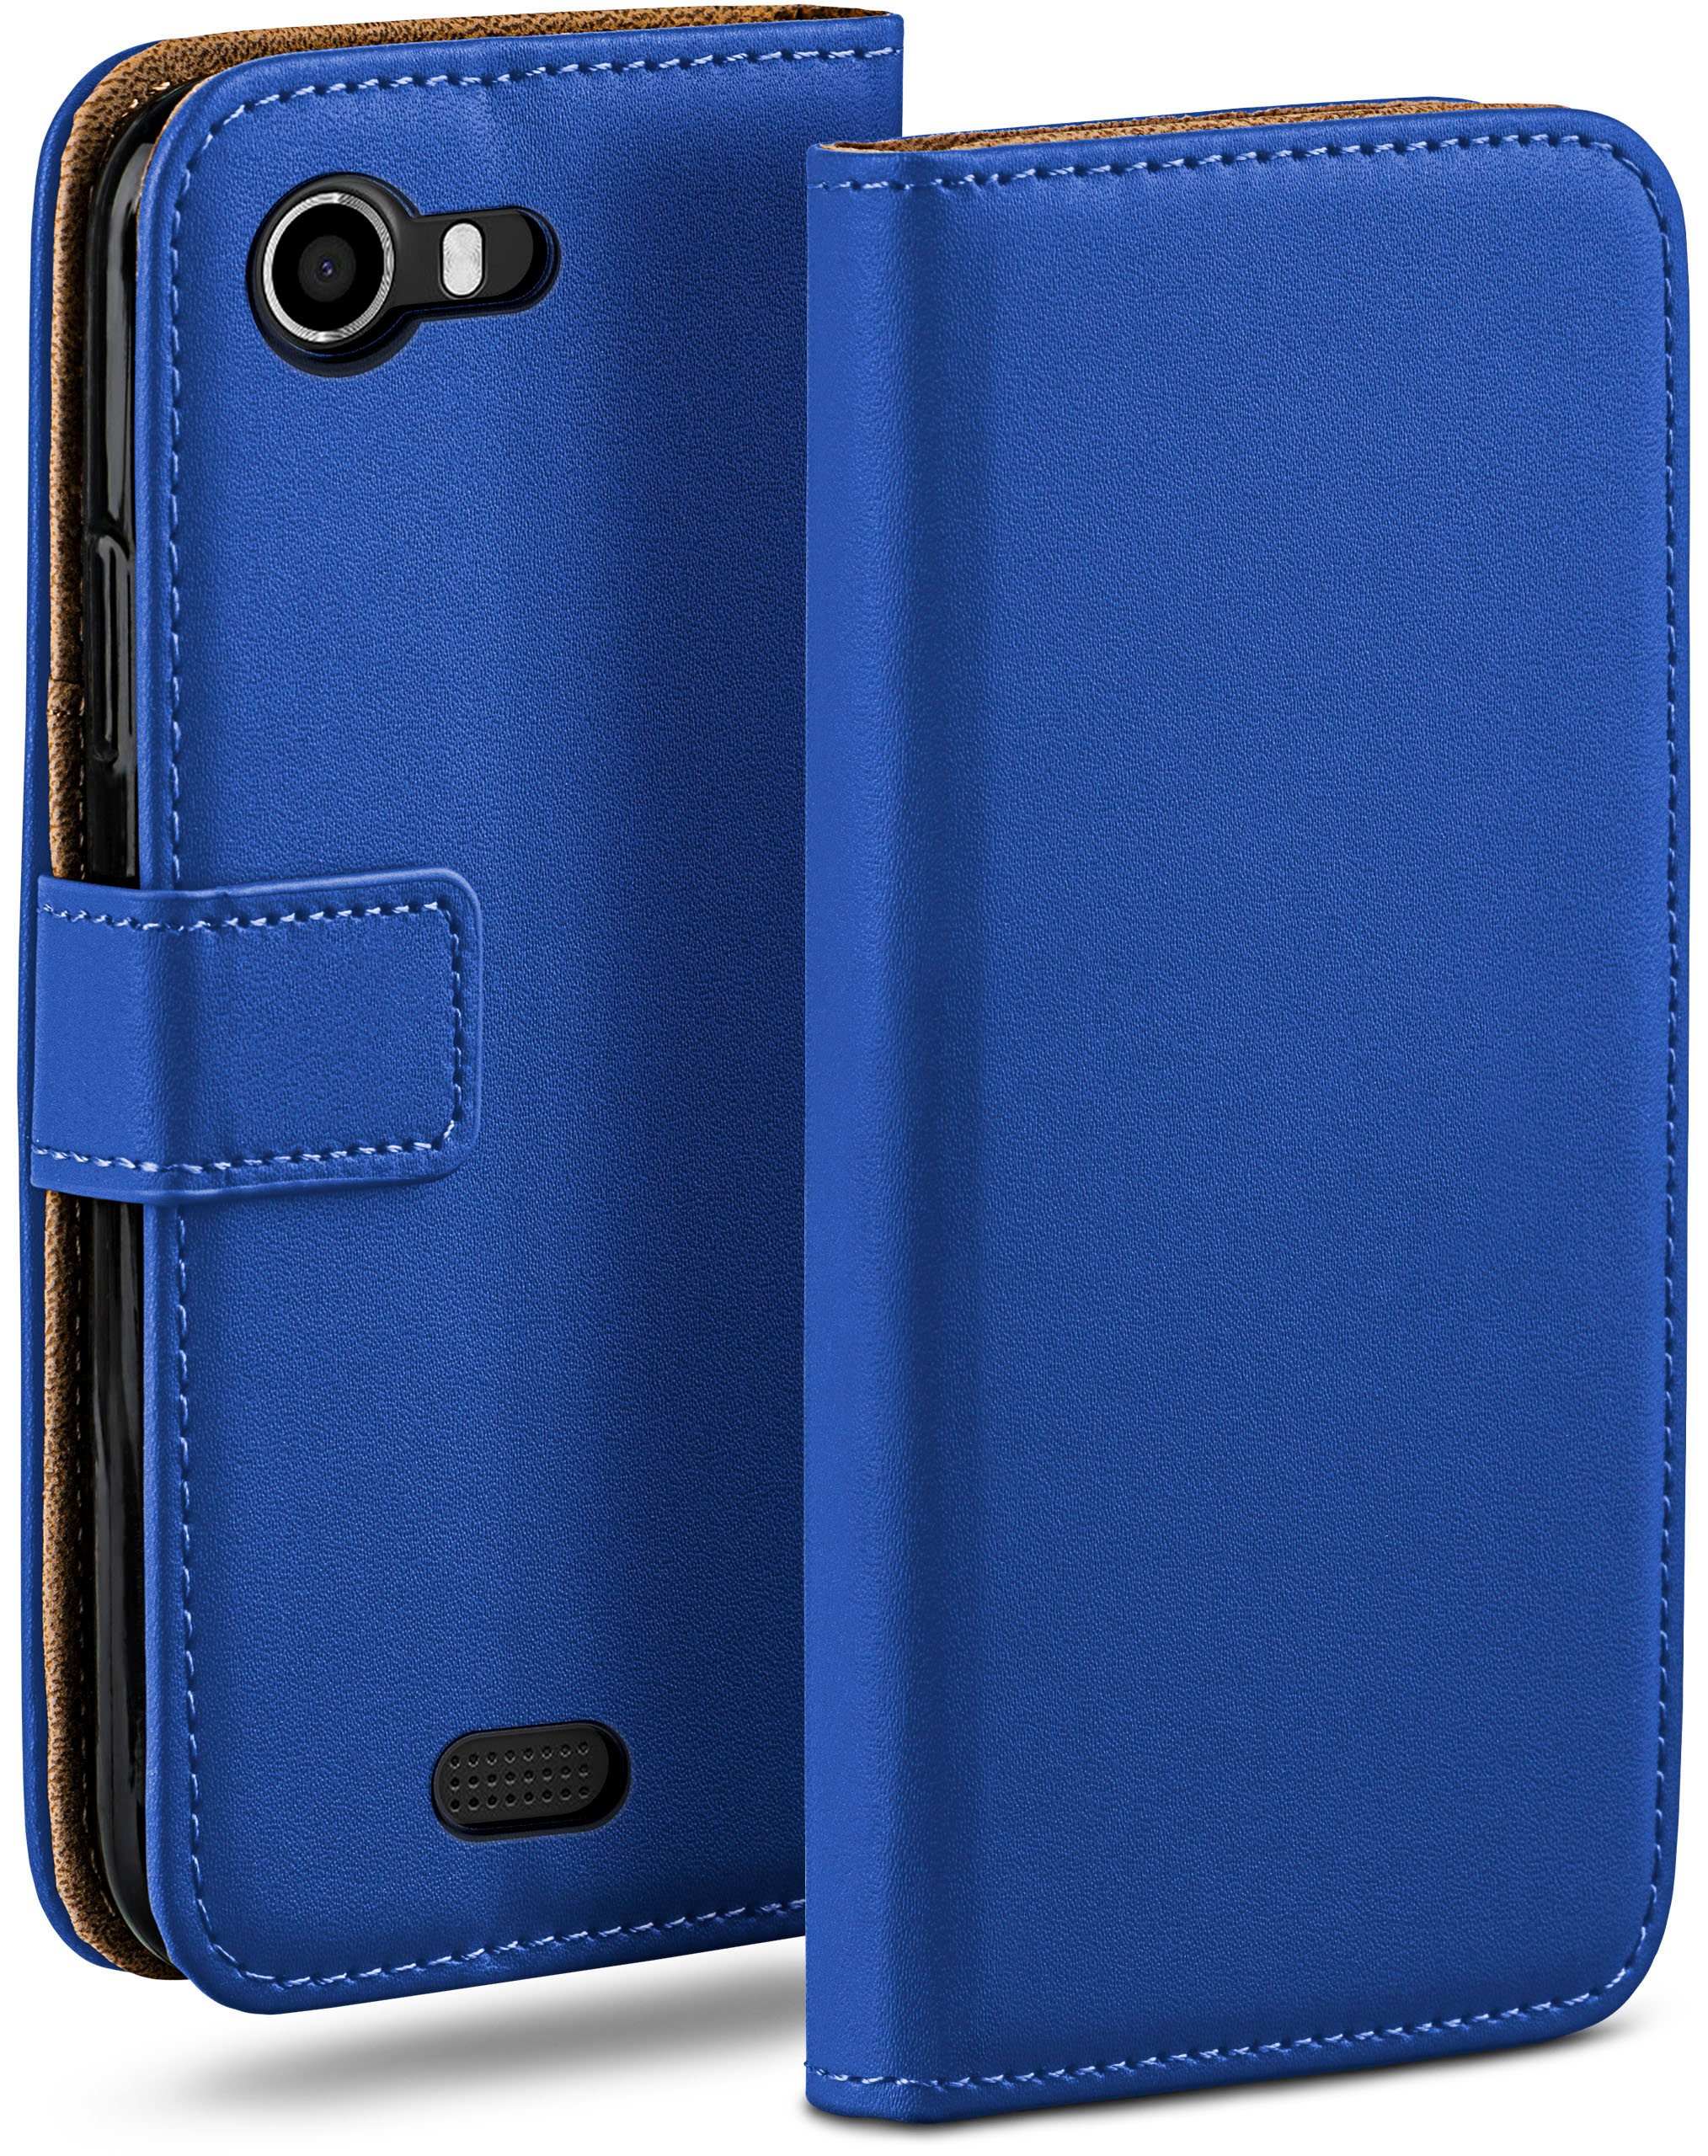 Case, Royal-Blue Bookcover, Book MOEX Lenny, Wiko,